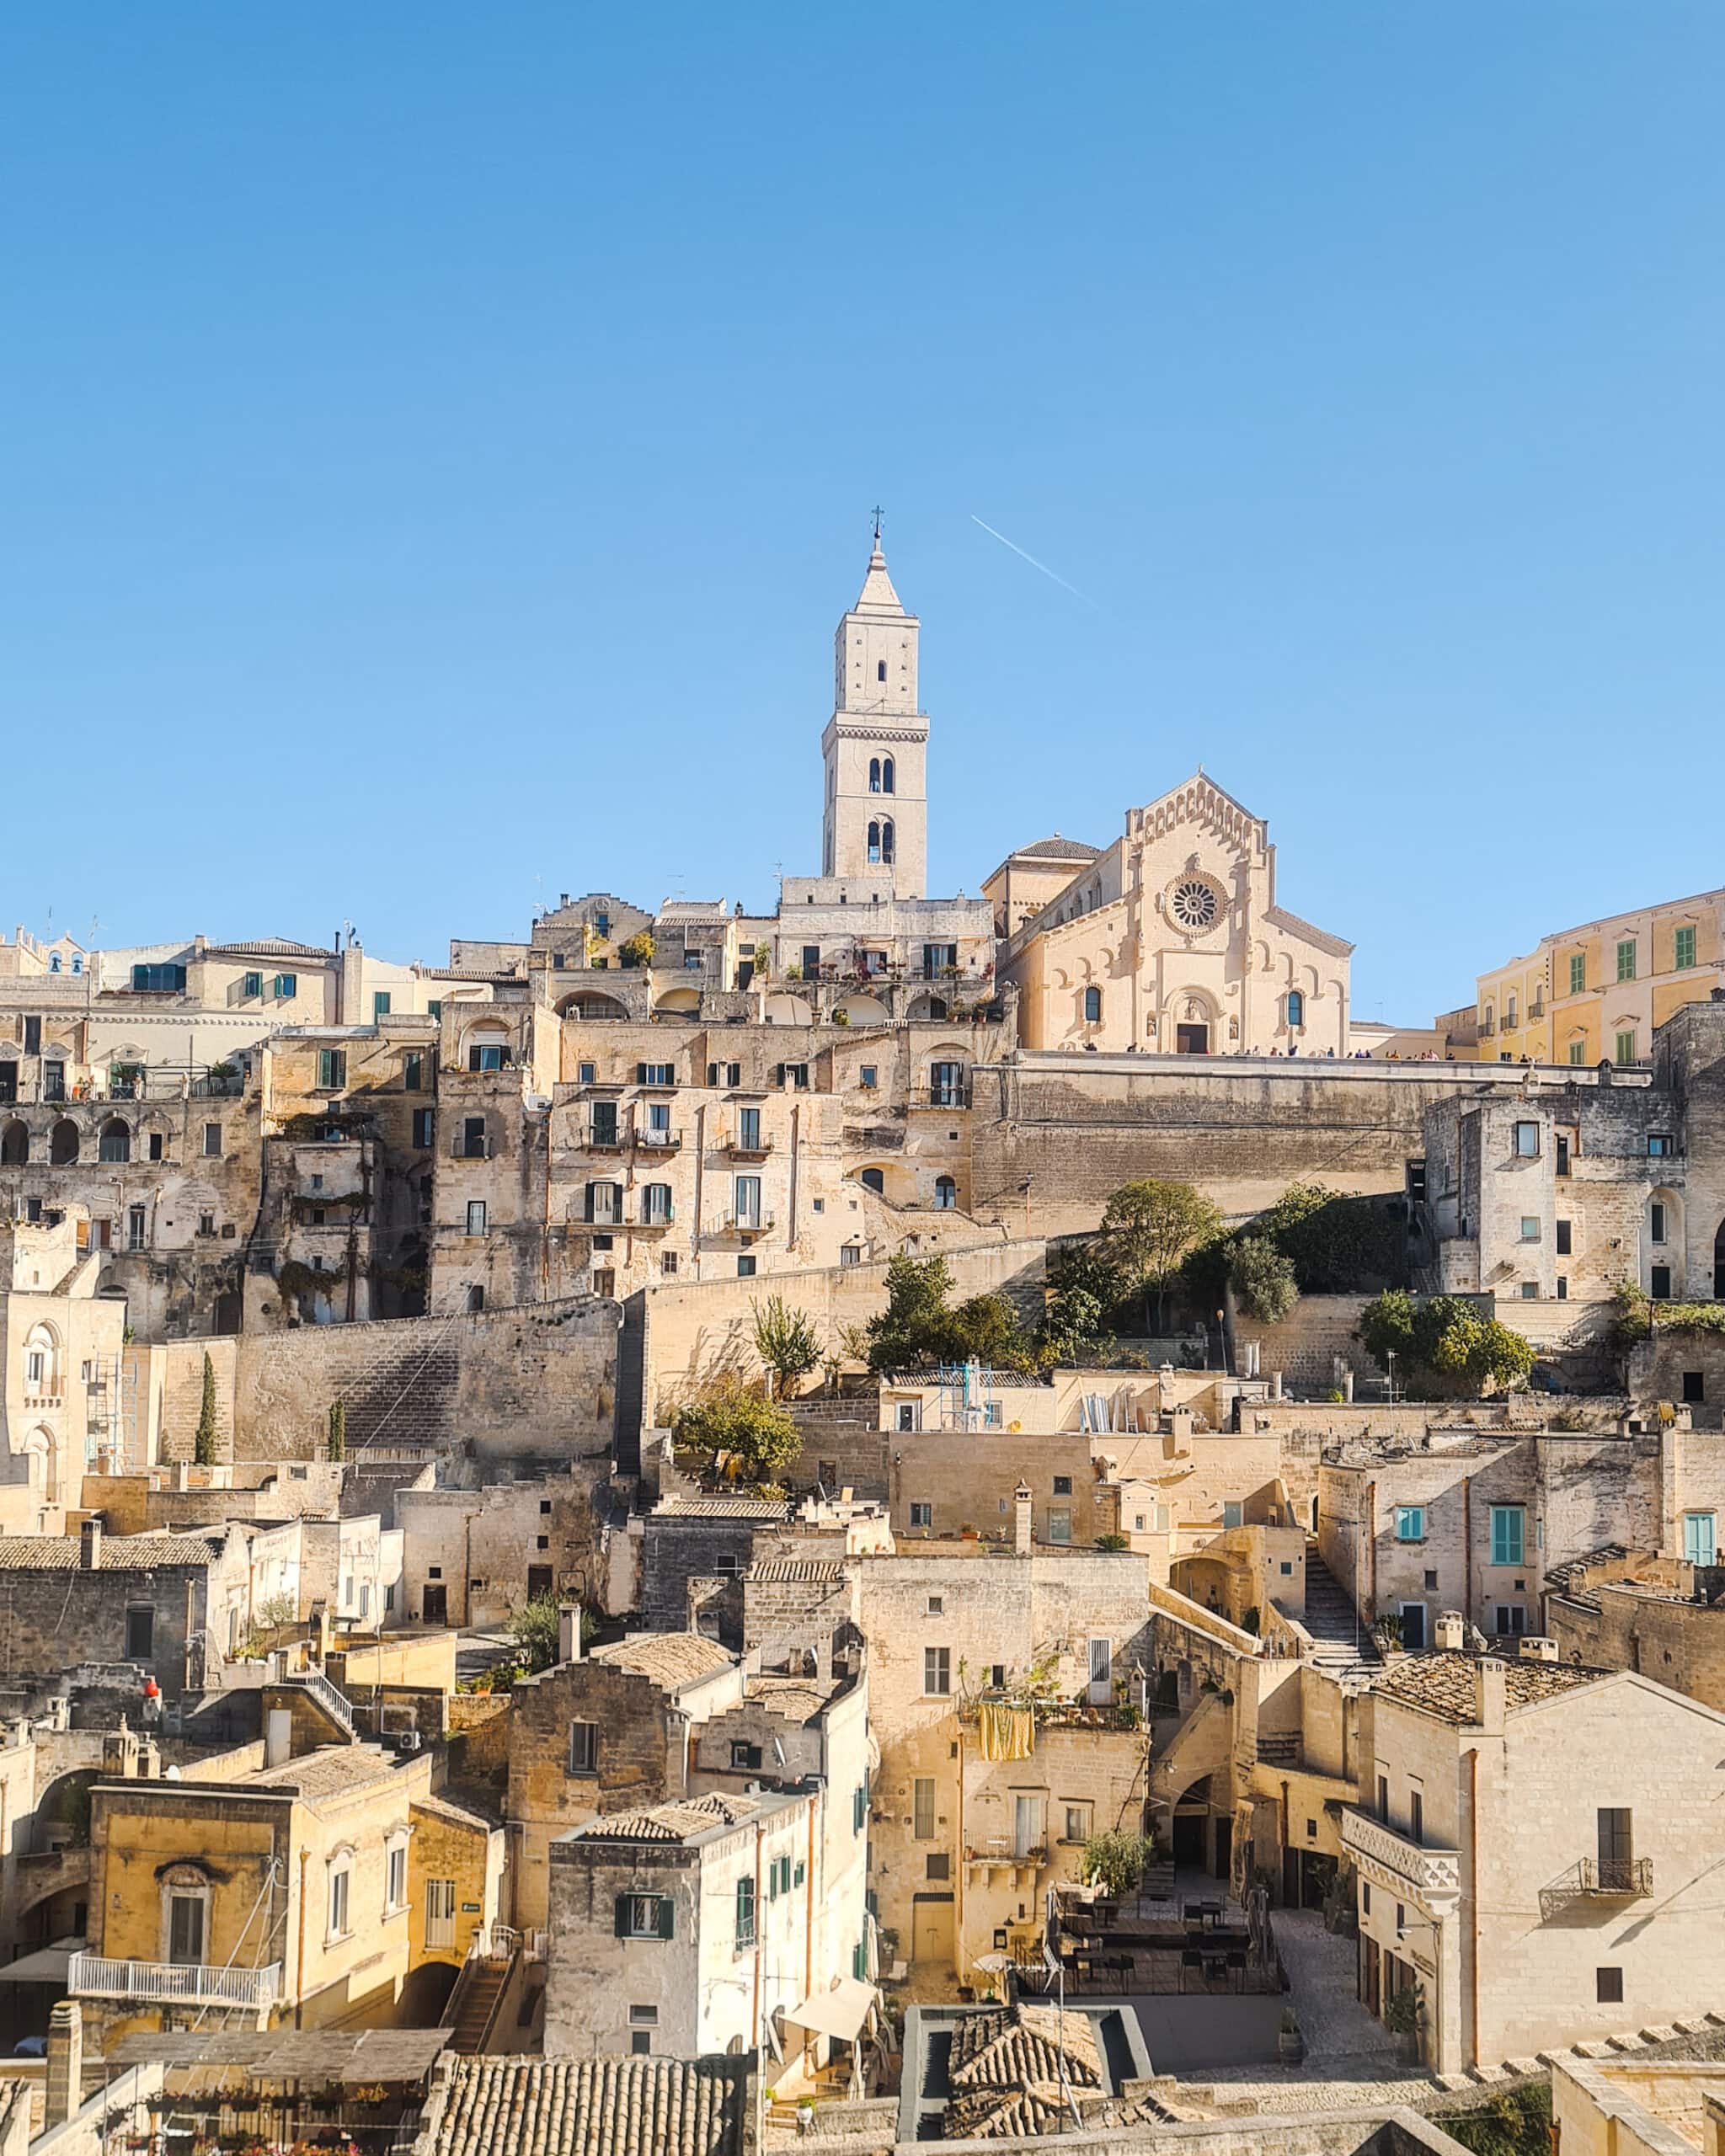 The stone town of Sassi Di Matera witch a church at the center set against a blue sky - The best hotel view in Matera